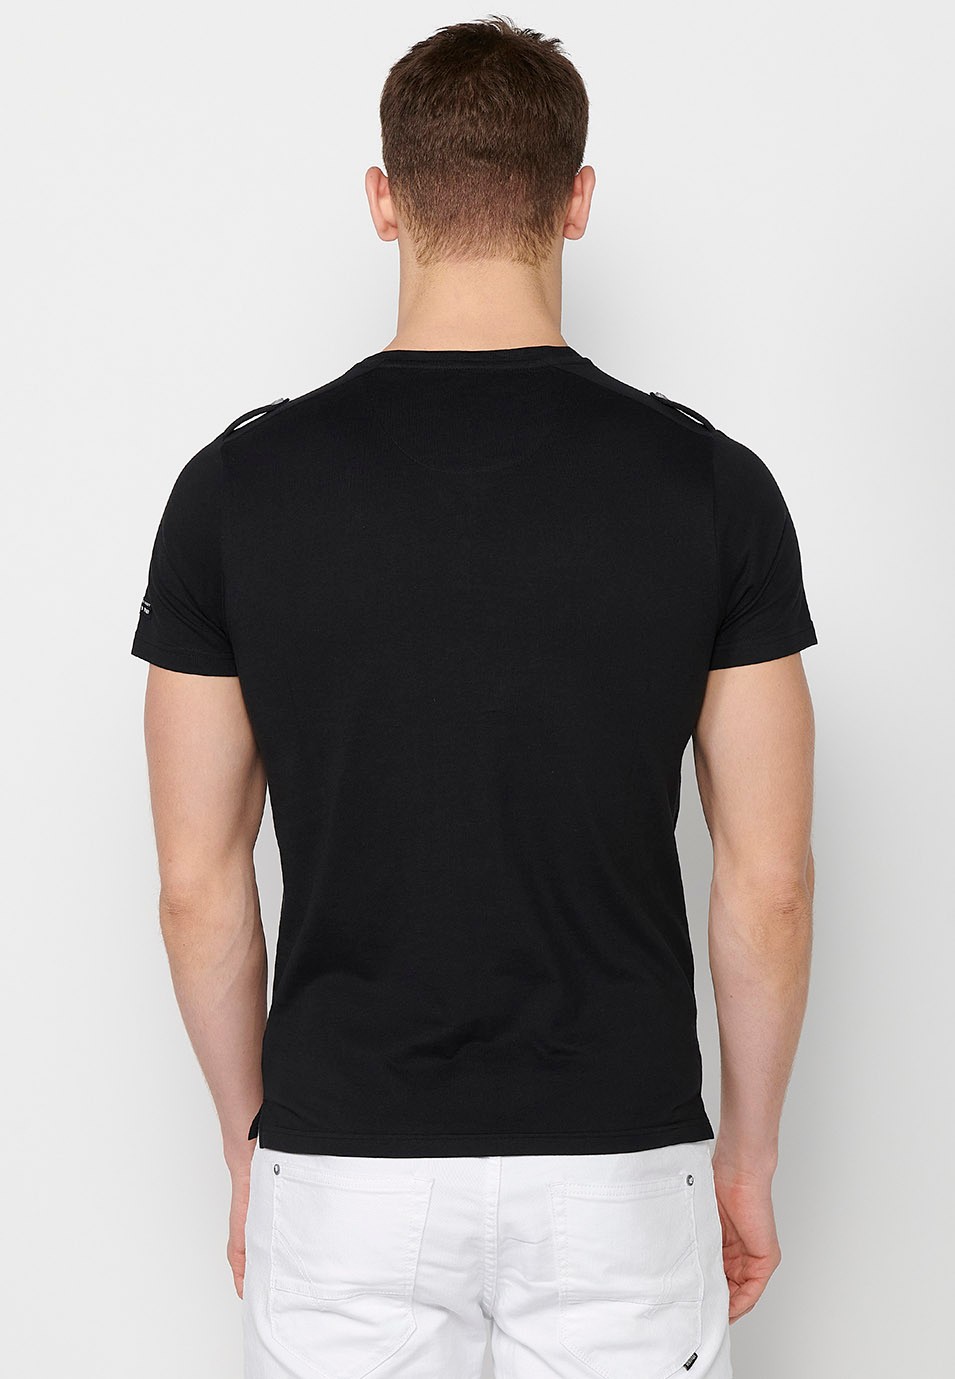 Men's black cotton short-sleeved T-shirt, round neck with buttoned opening